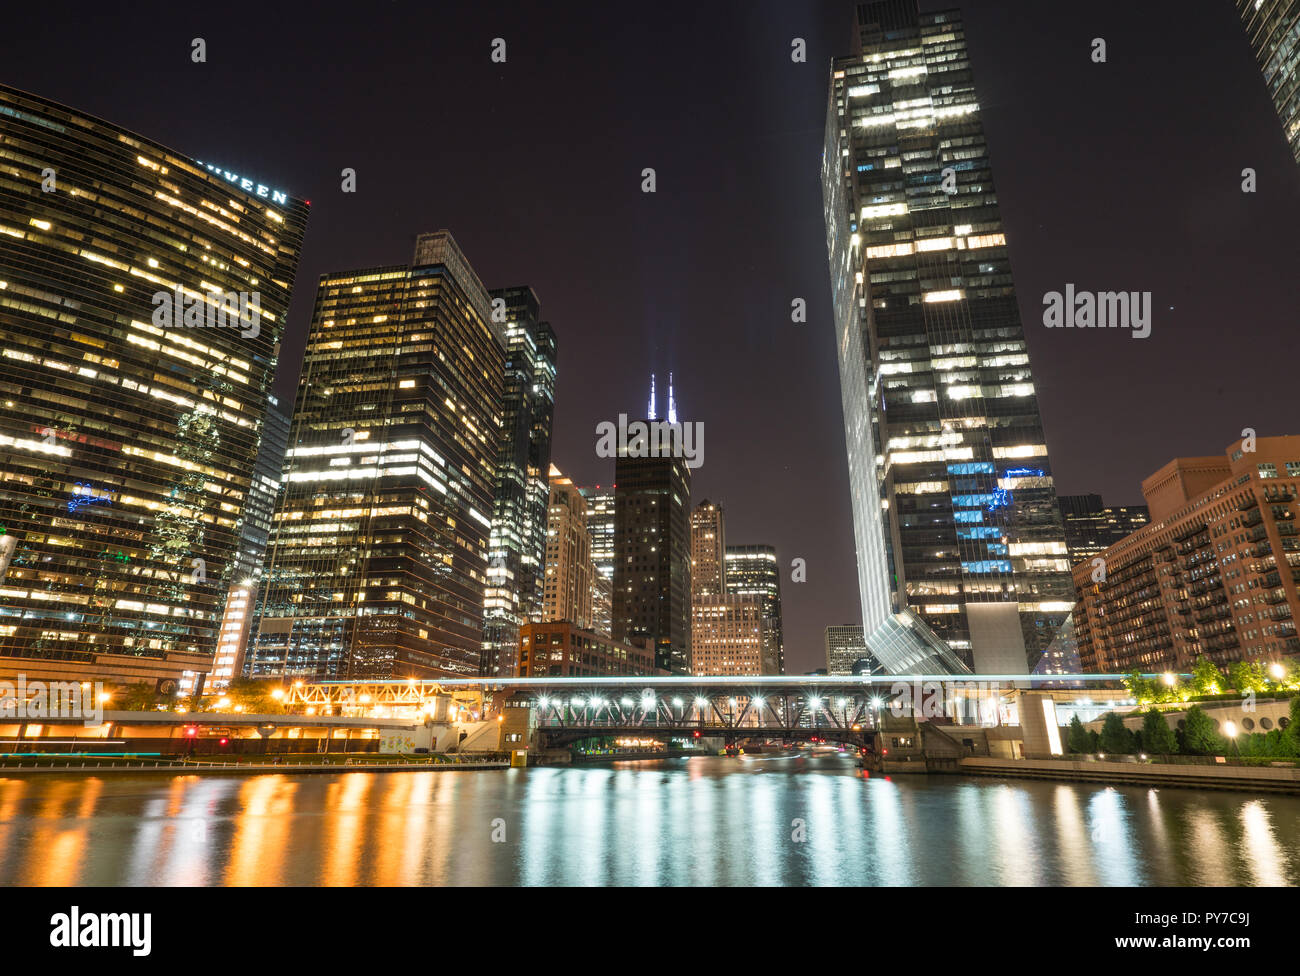 CHICAGO, IL - JULY 12, 2018: Downtown Chicago city skyline along the Chicago River at night Stock Photo